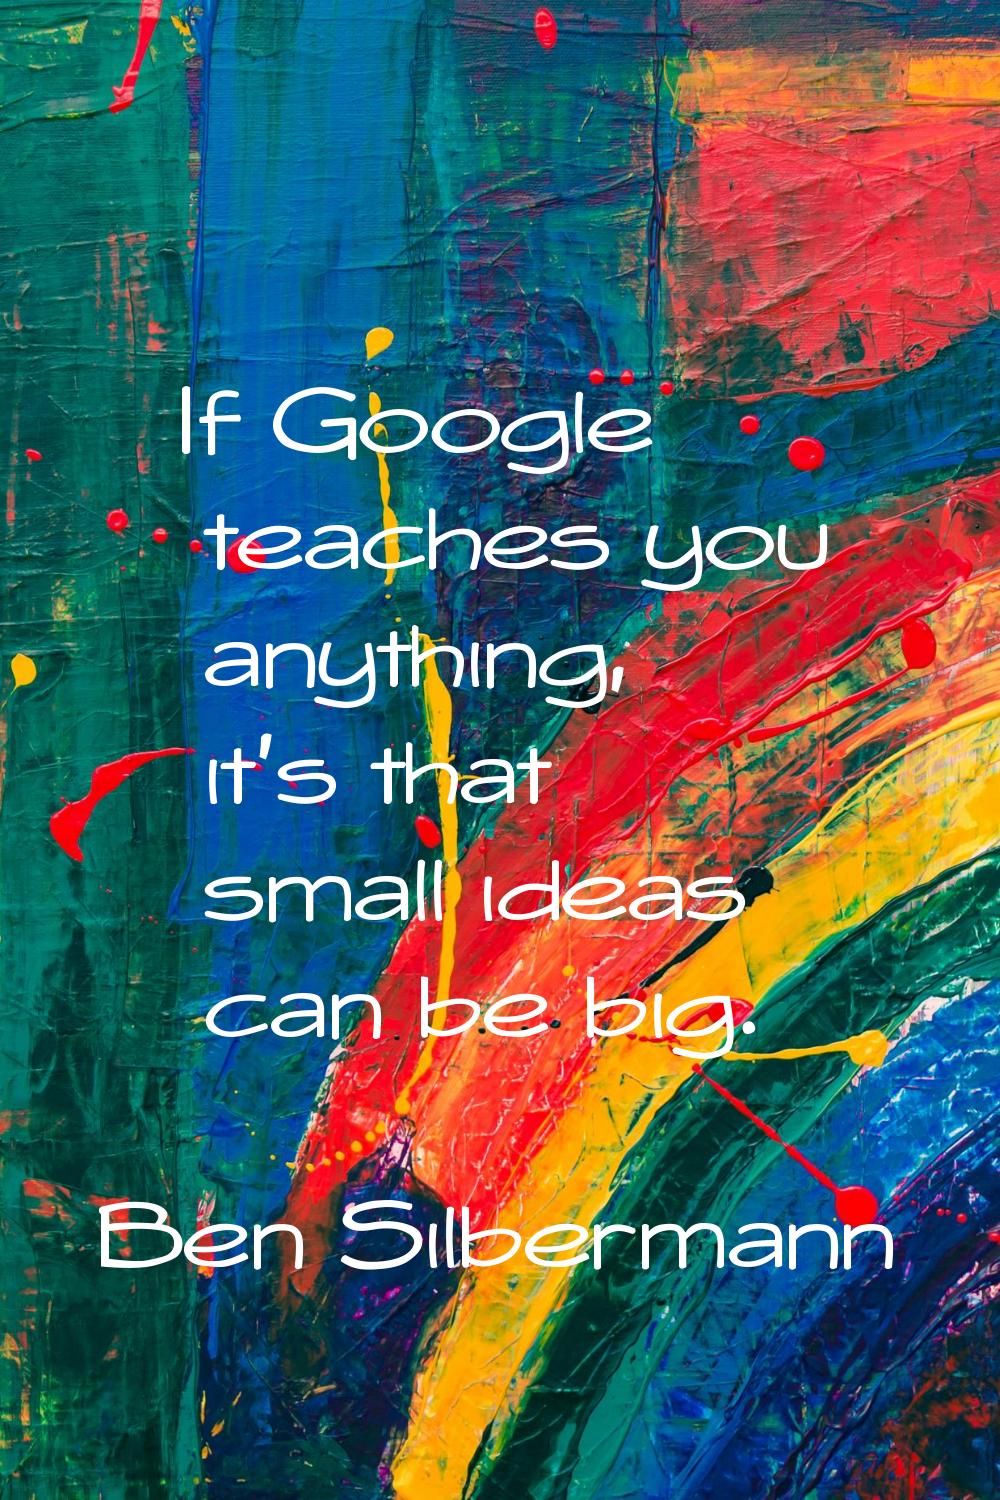 If Google teaches you anything, it's that small ideas can be big.